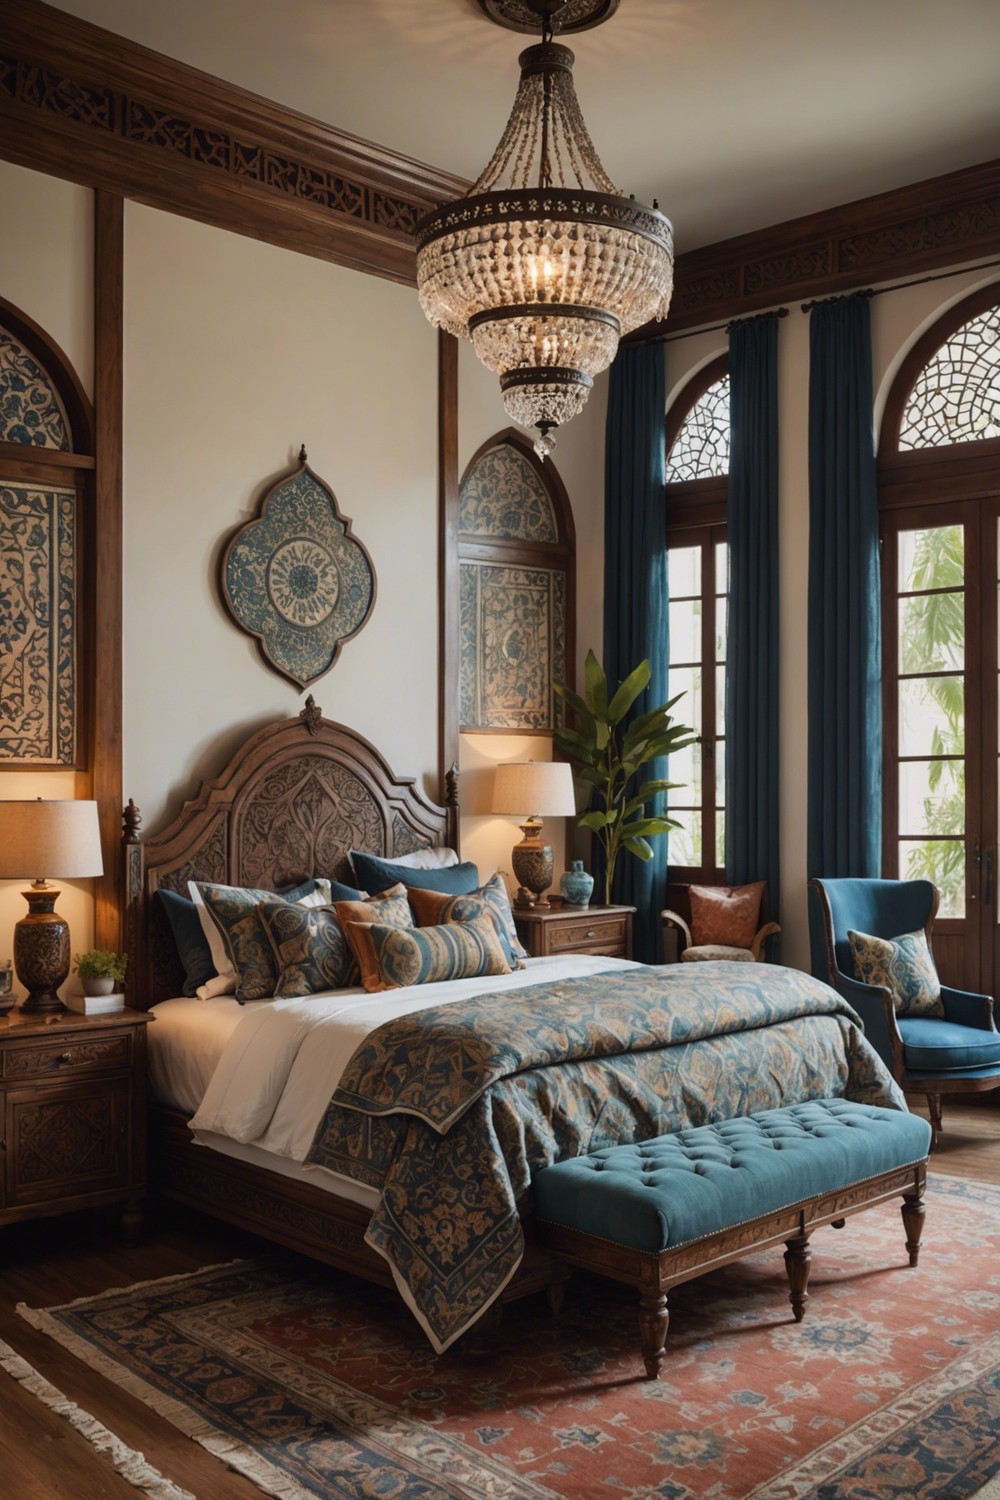 Hanging Glass Bottle Chandeliers above a Moroccan-Inspired Bed